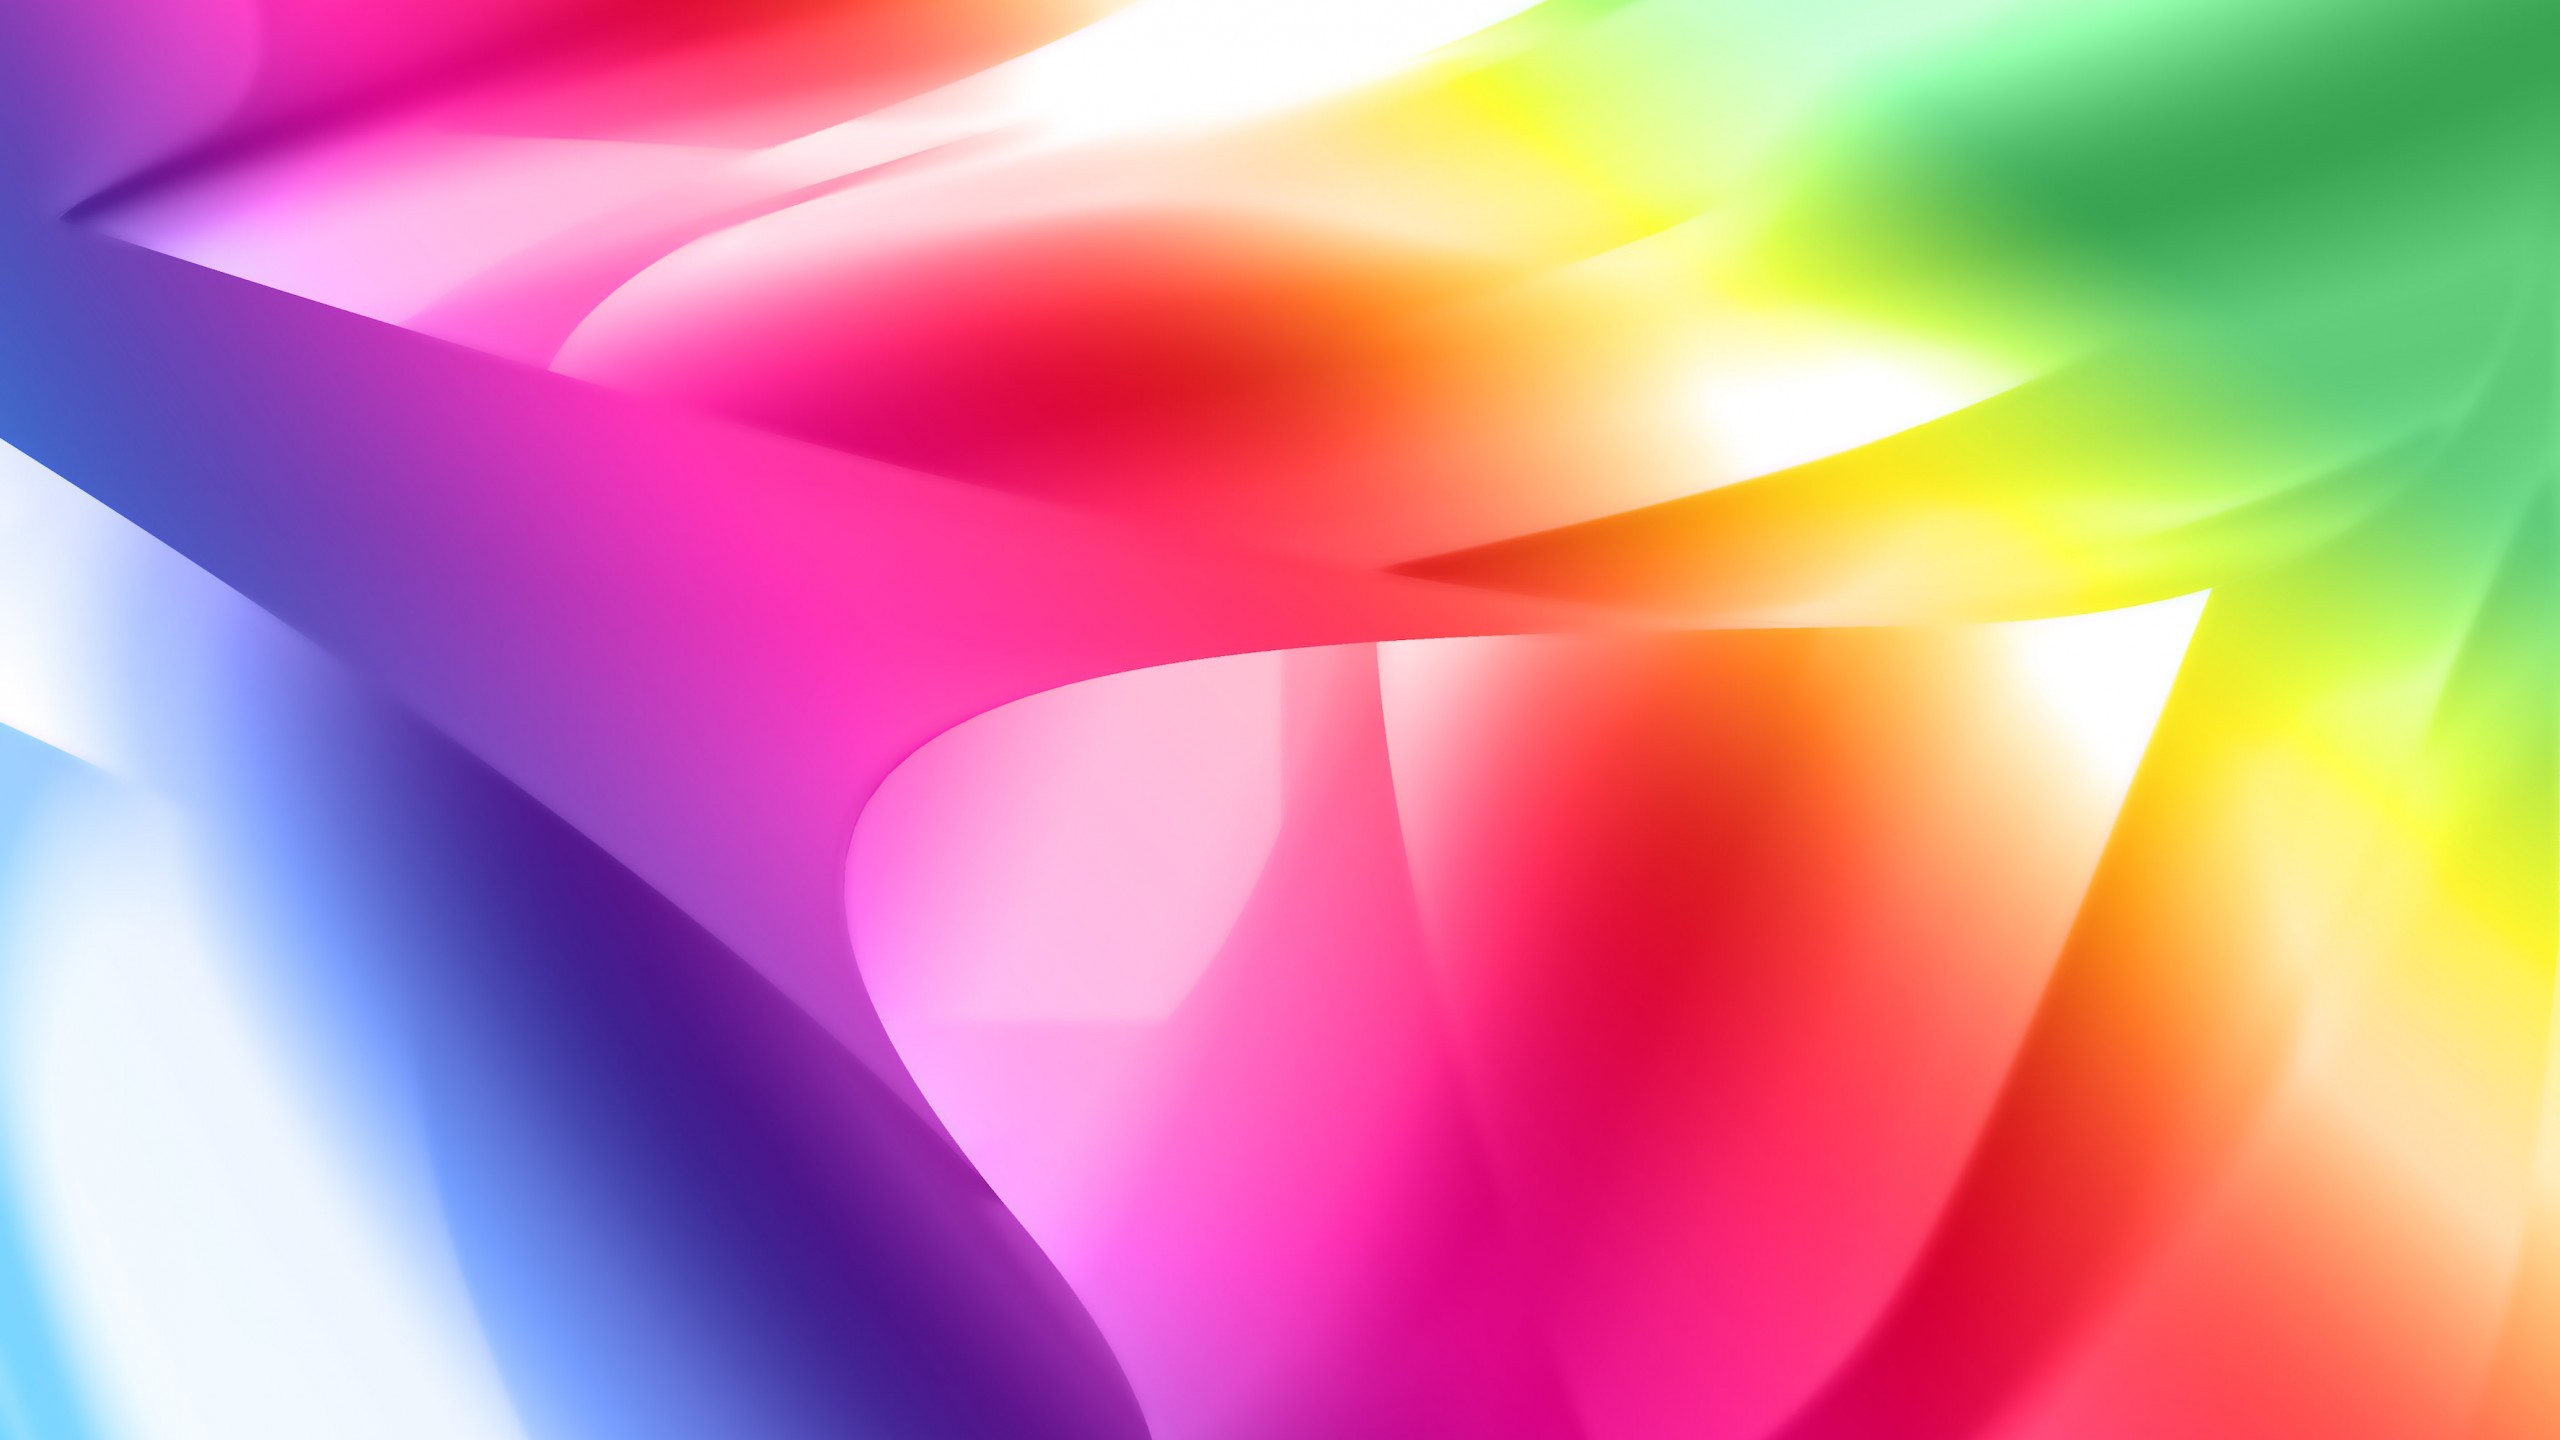 General 2560x1440 abstract shapes digital art colorful pink